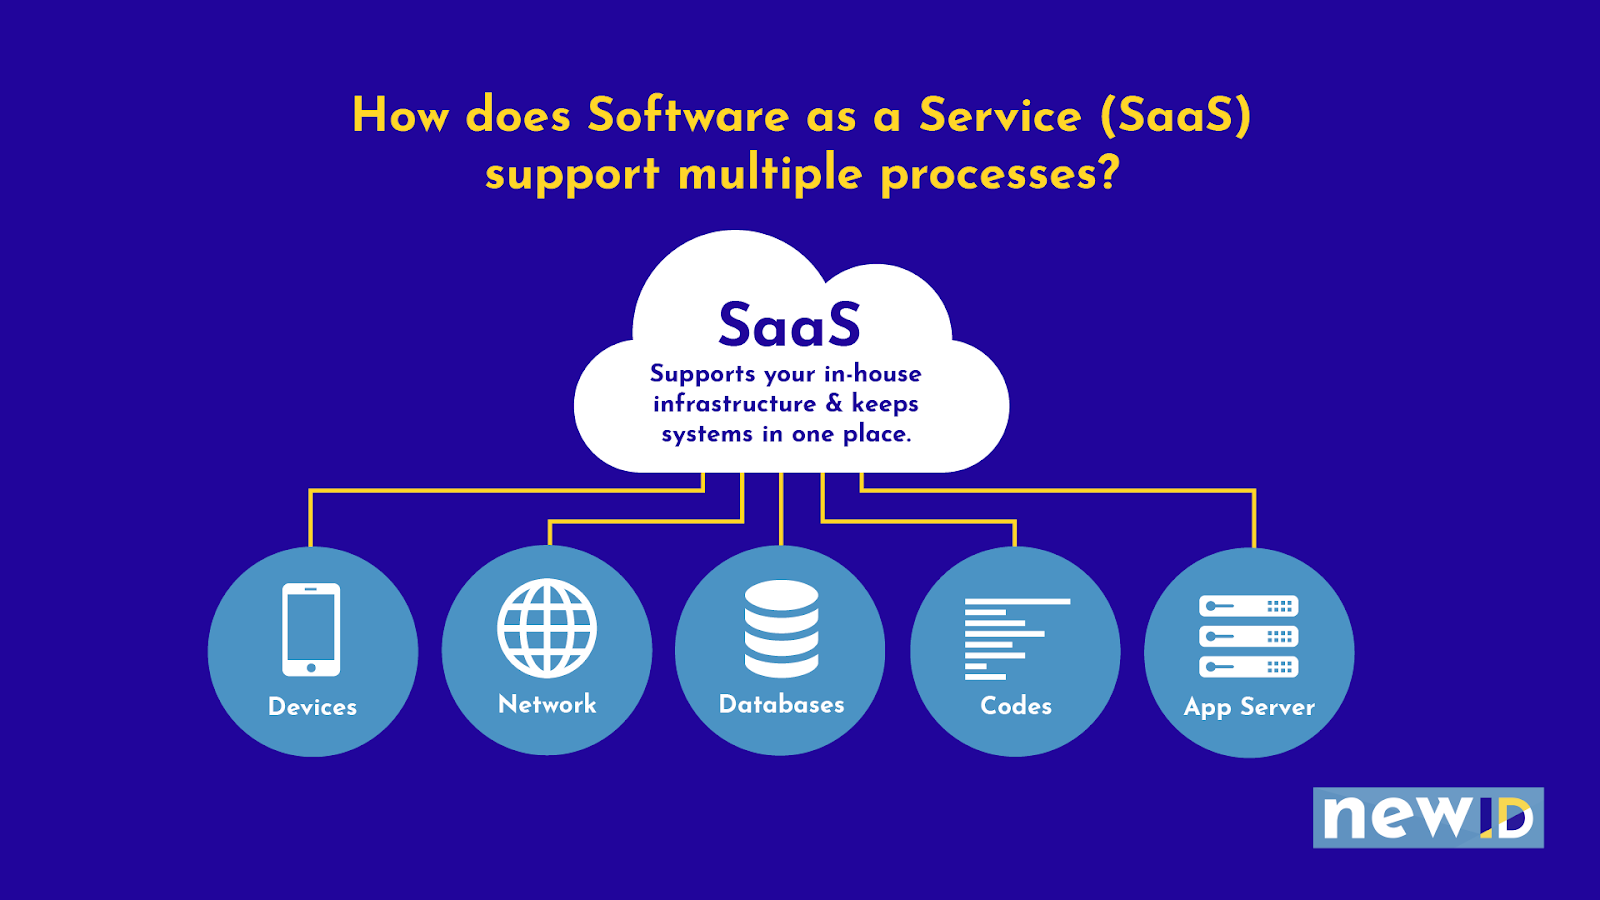 Diagram titled ‘How does Software as a Service (SaaS0 support multiple processes. The term SaaS is in a cloud with five liness branching out. At the end of the lines are five circles with the terms: Devices, Network, Databases, Codes, and App Server.